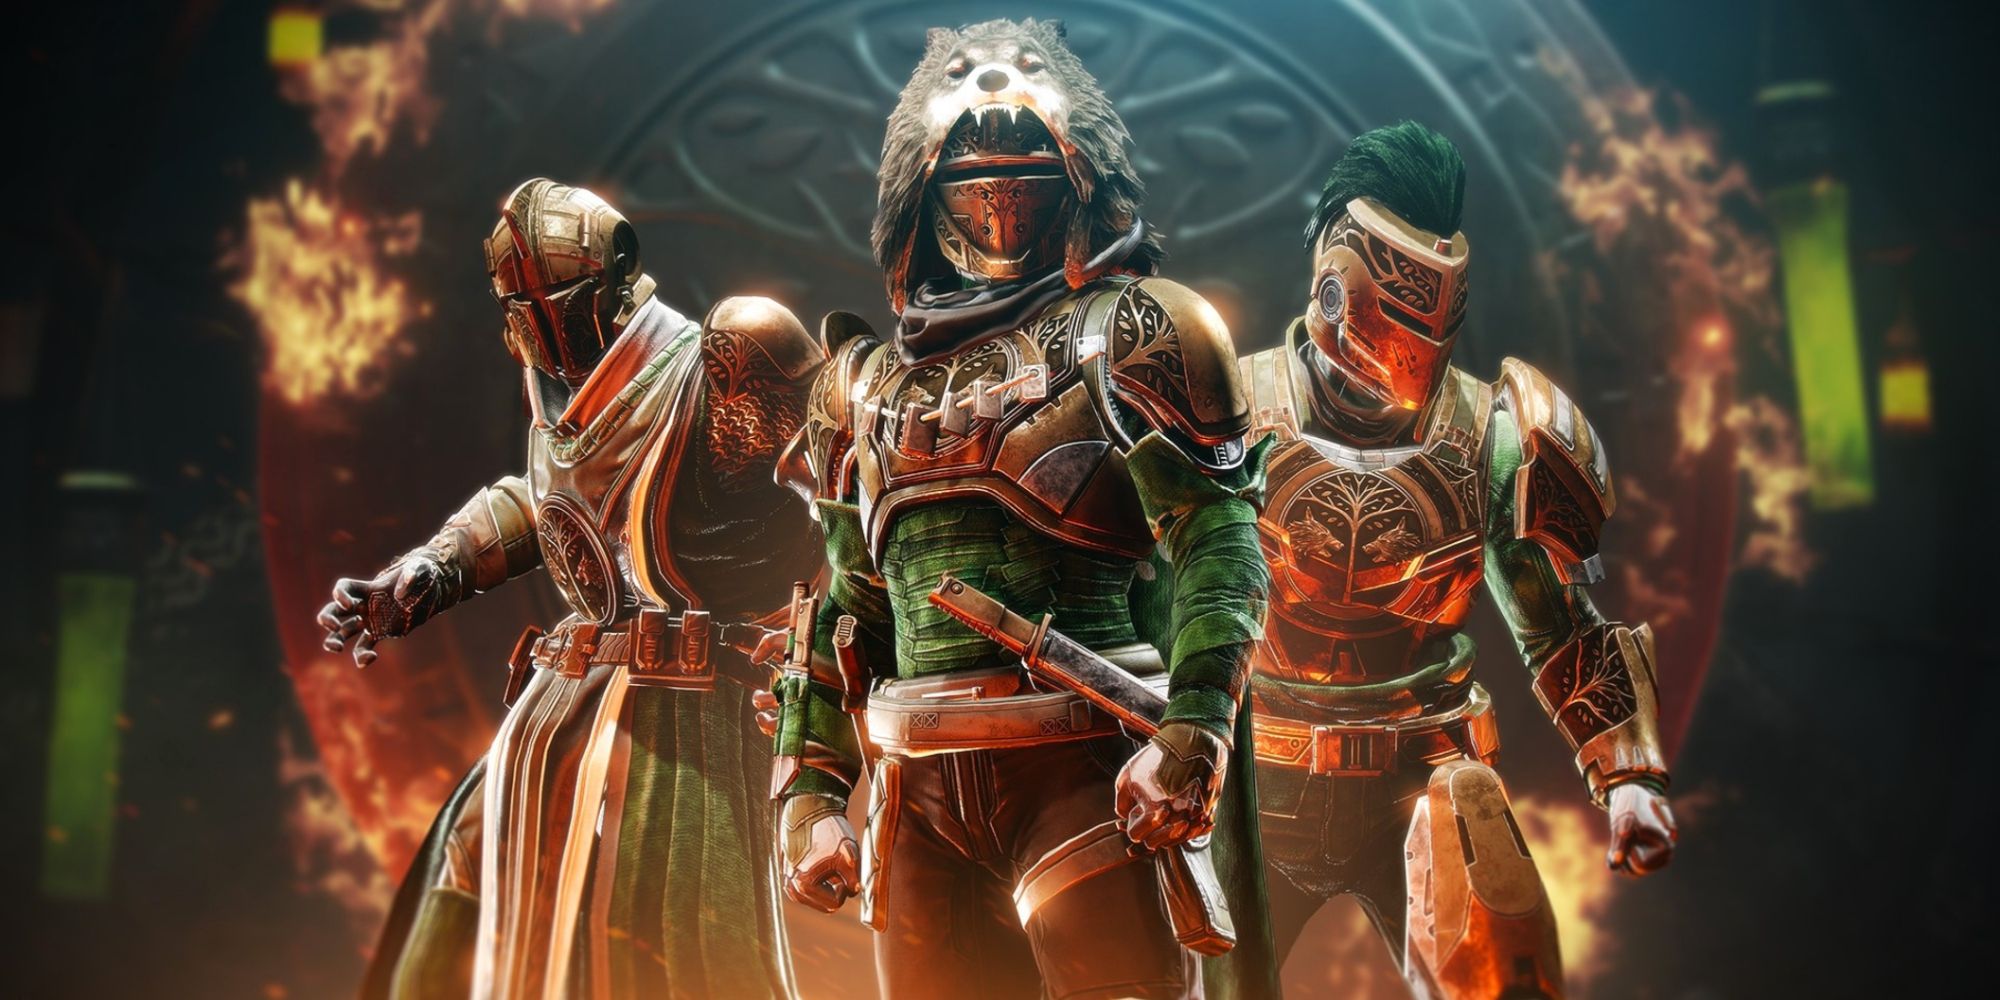 Highly anticipated armor returning to Destiny in Season of the Seraph